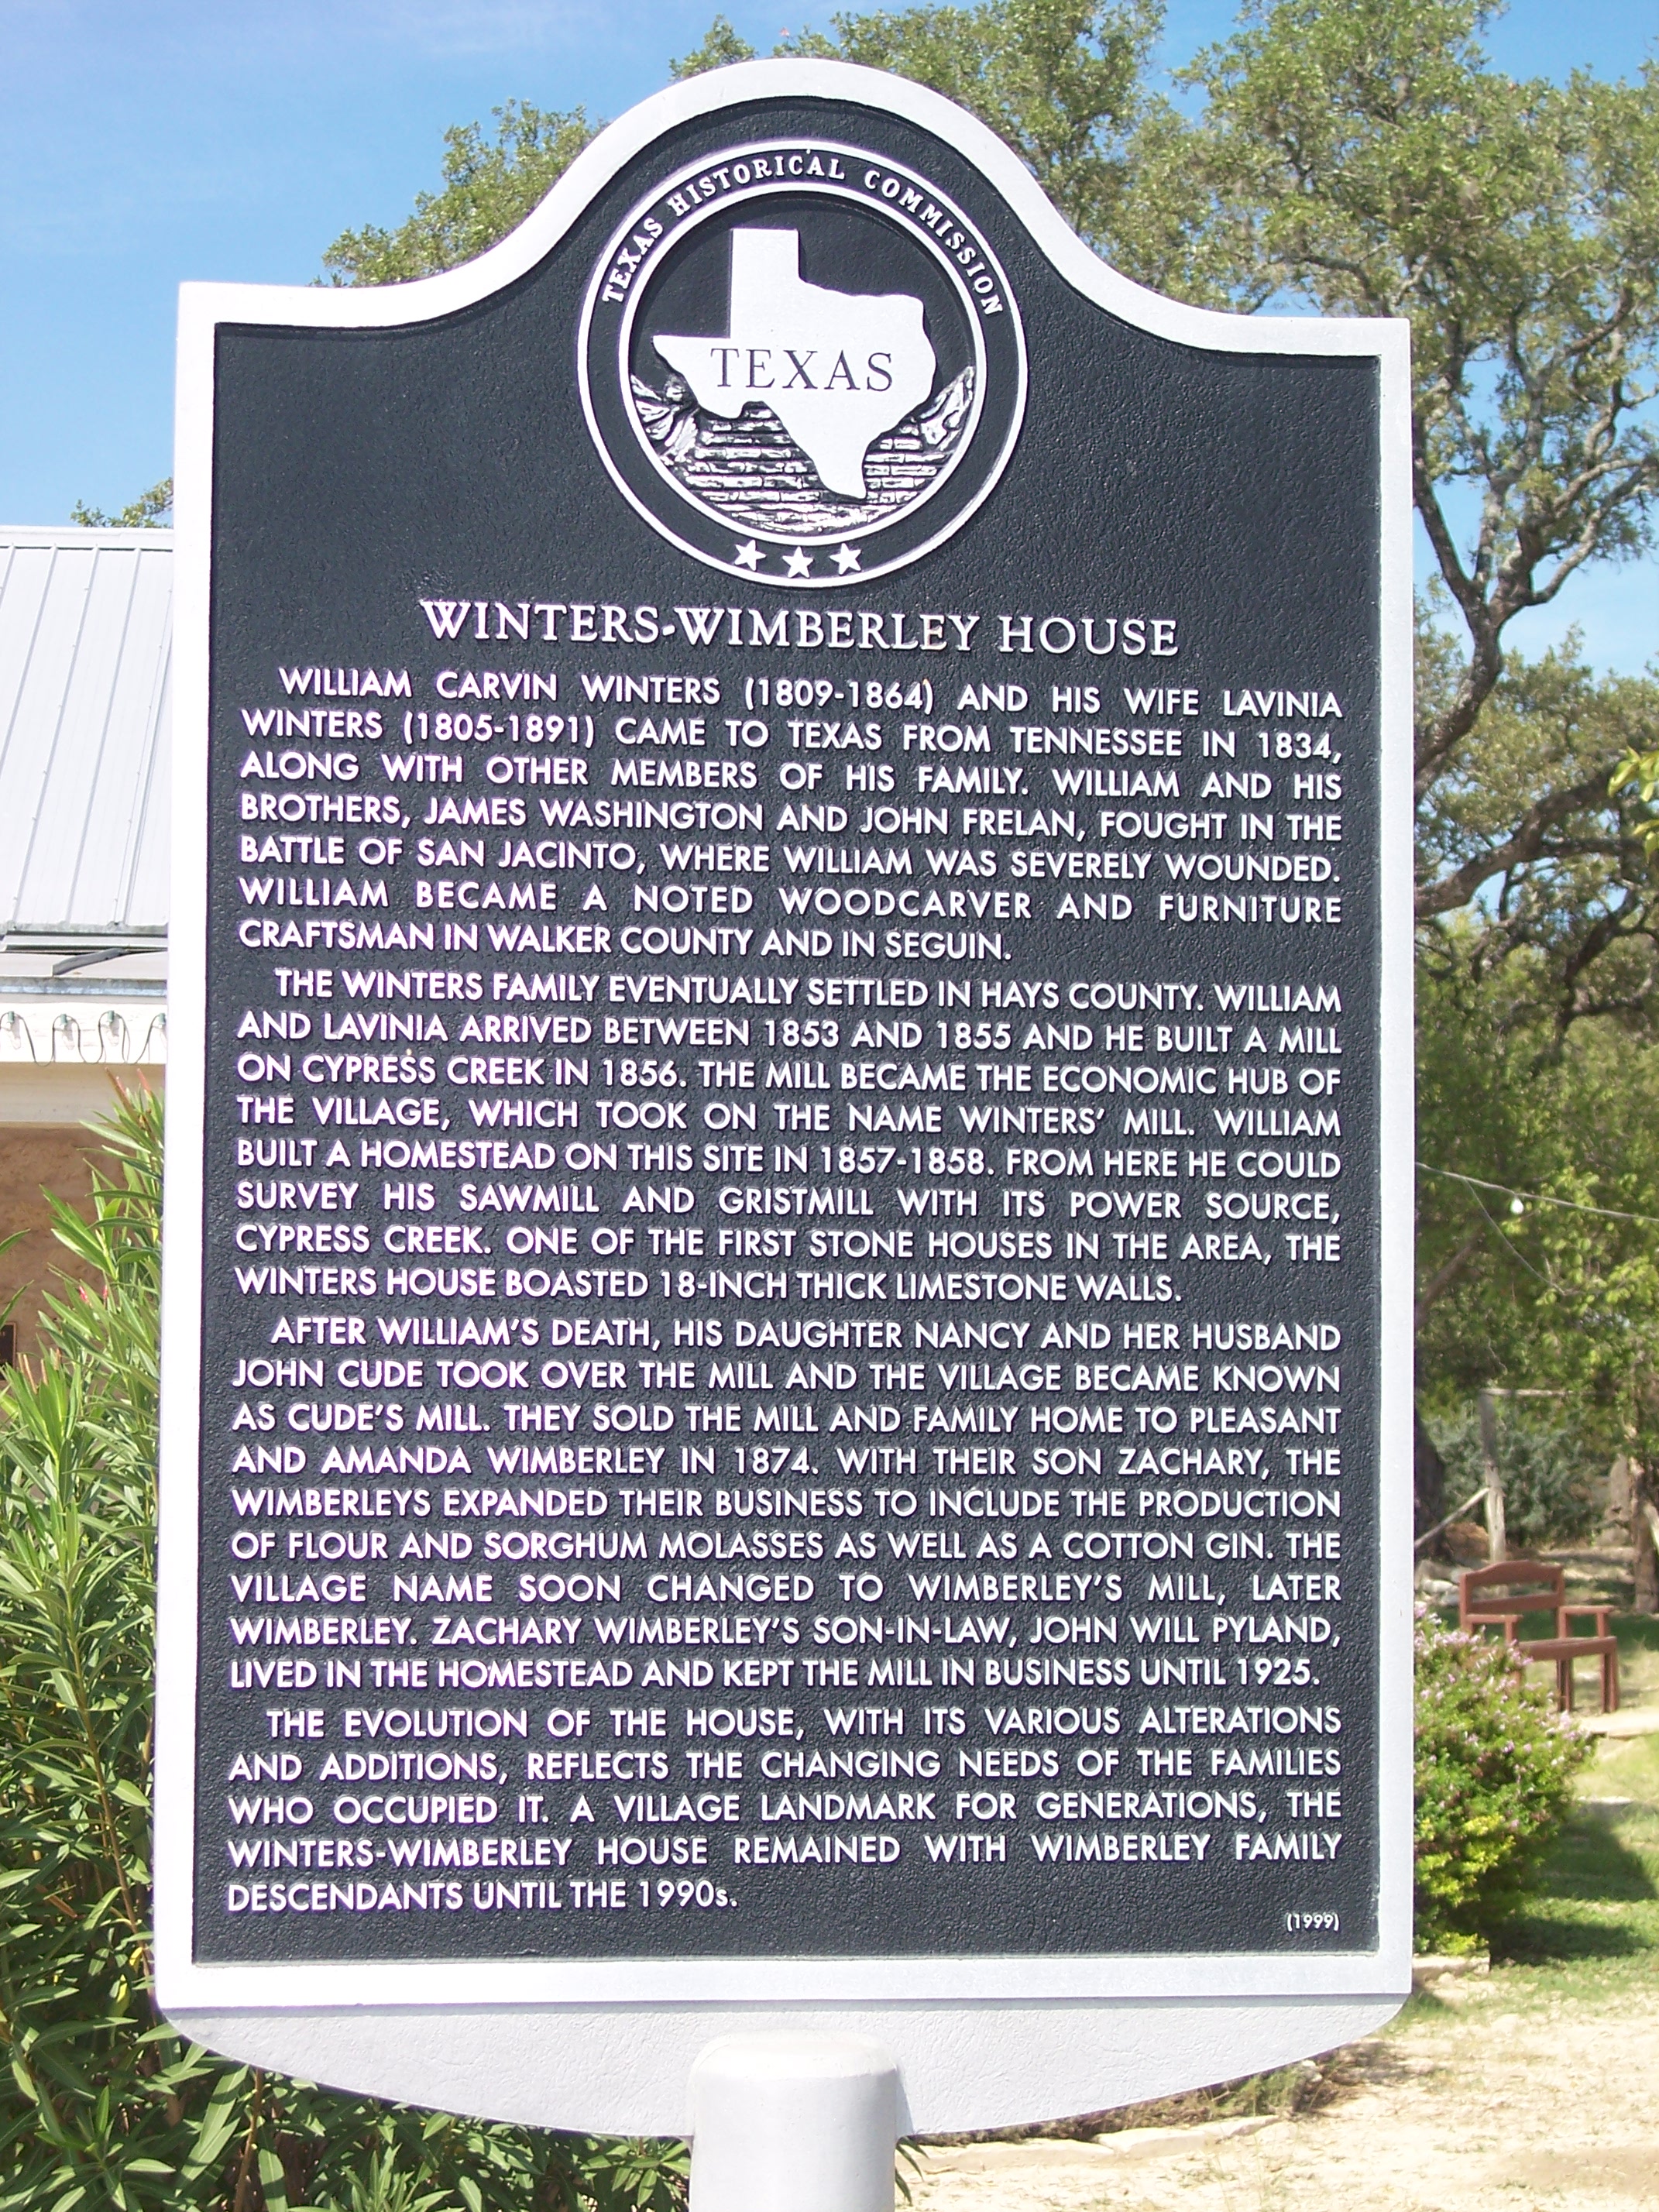 Historical Marker for the Winters Wimberley House